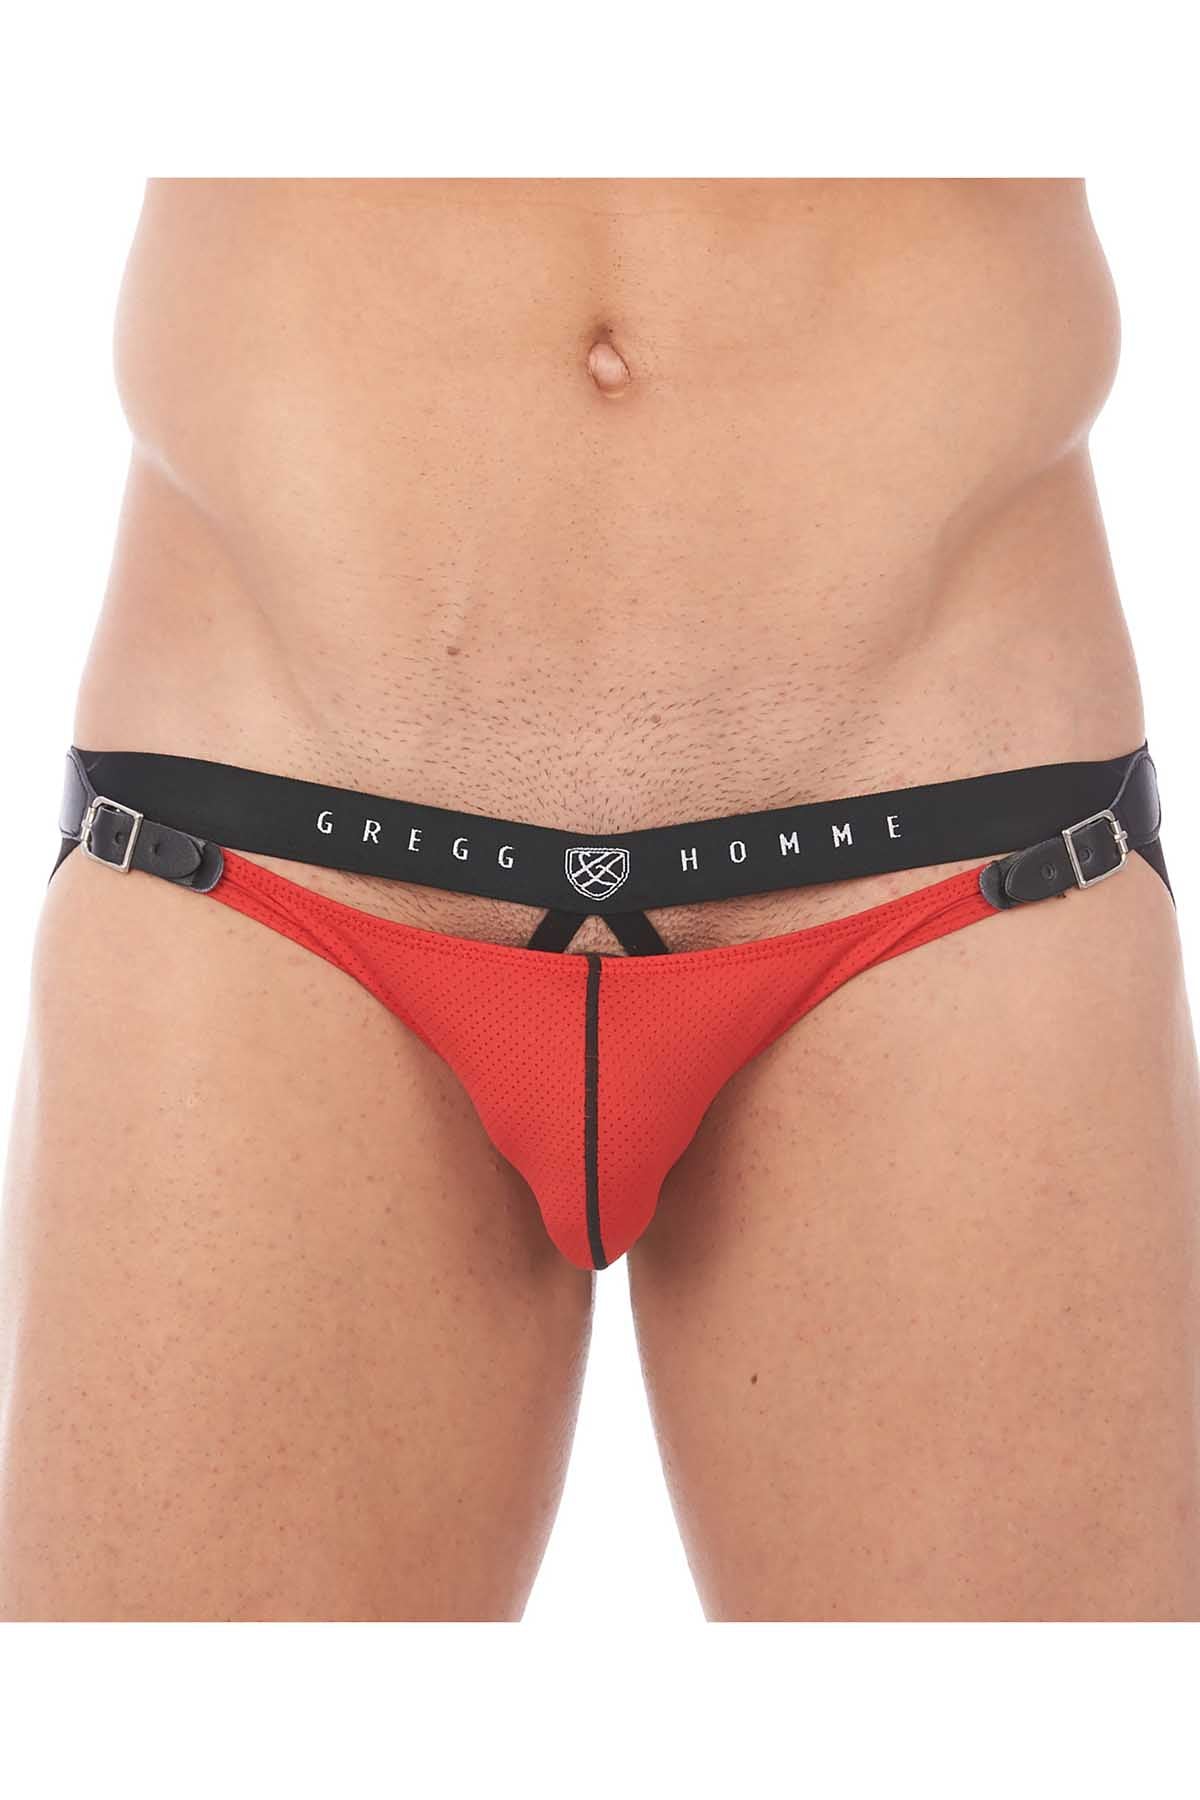 Gregg Homme Red Chaser C-Ring Detachable Pouch Brief